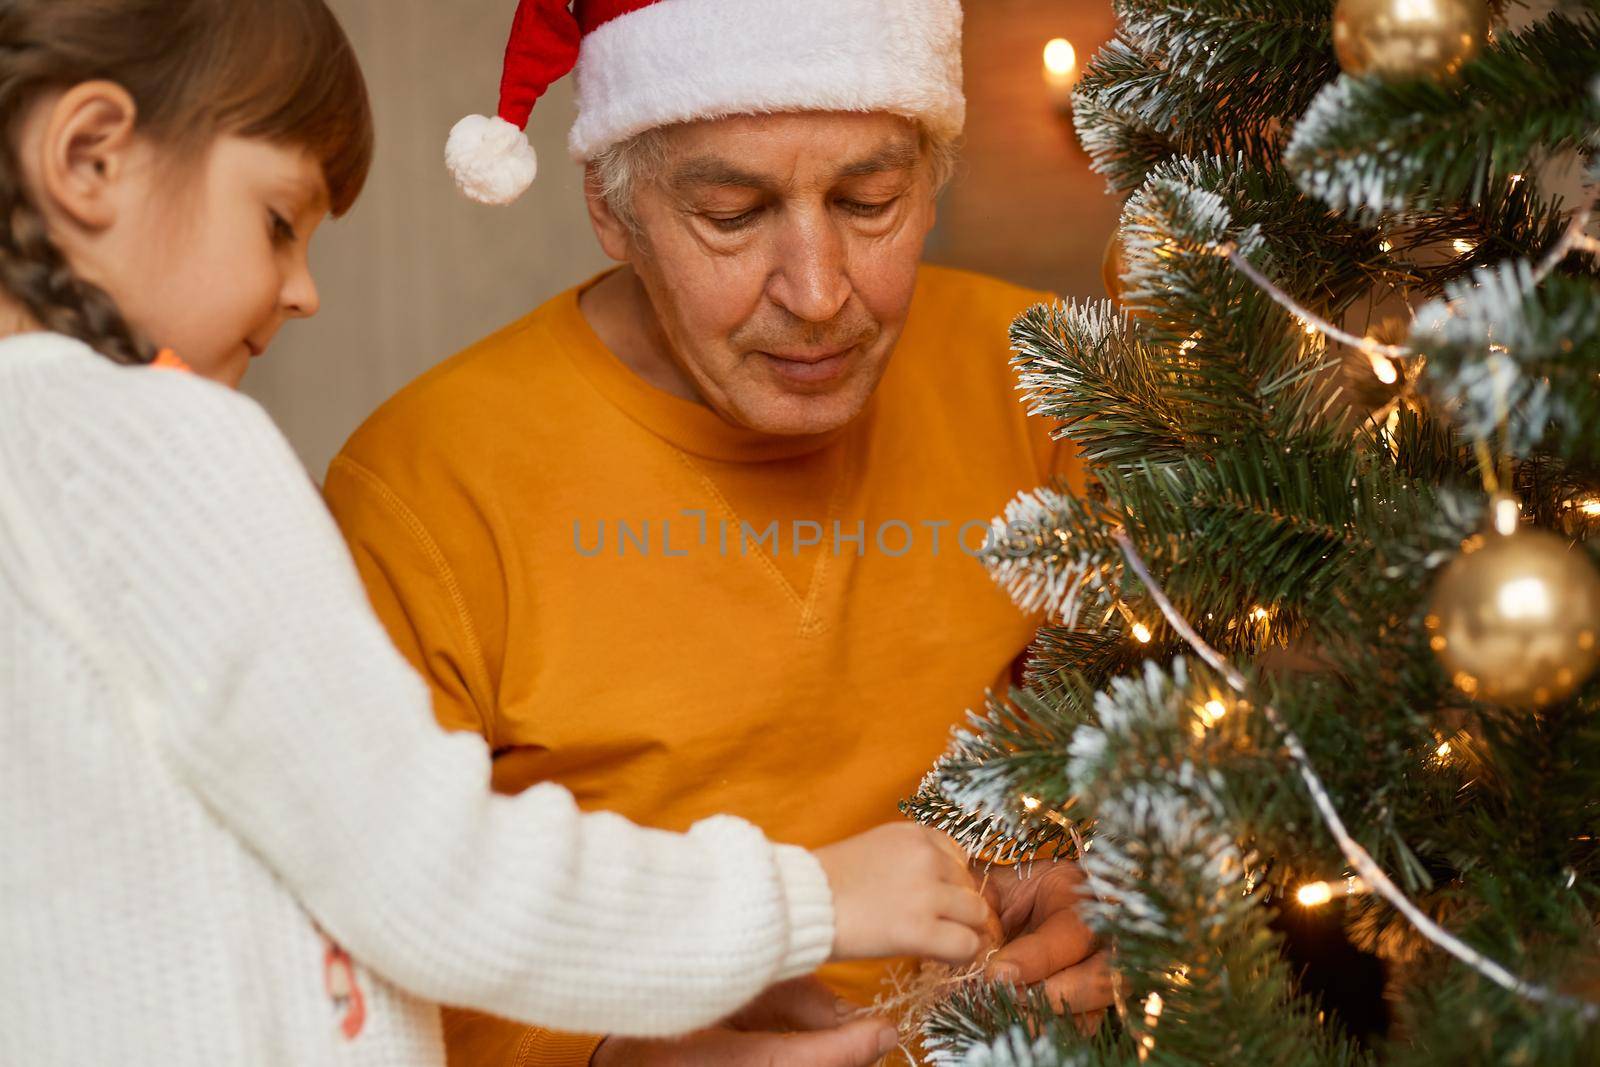 Old man with his grandchild decorating fir tree, posing in festive living room, mature male in orange shirt and santa claus hat looks concentrated at xmas tree, spending time together.